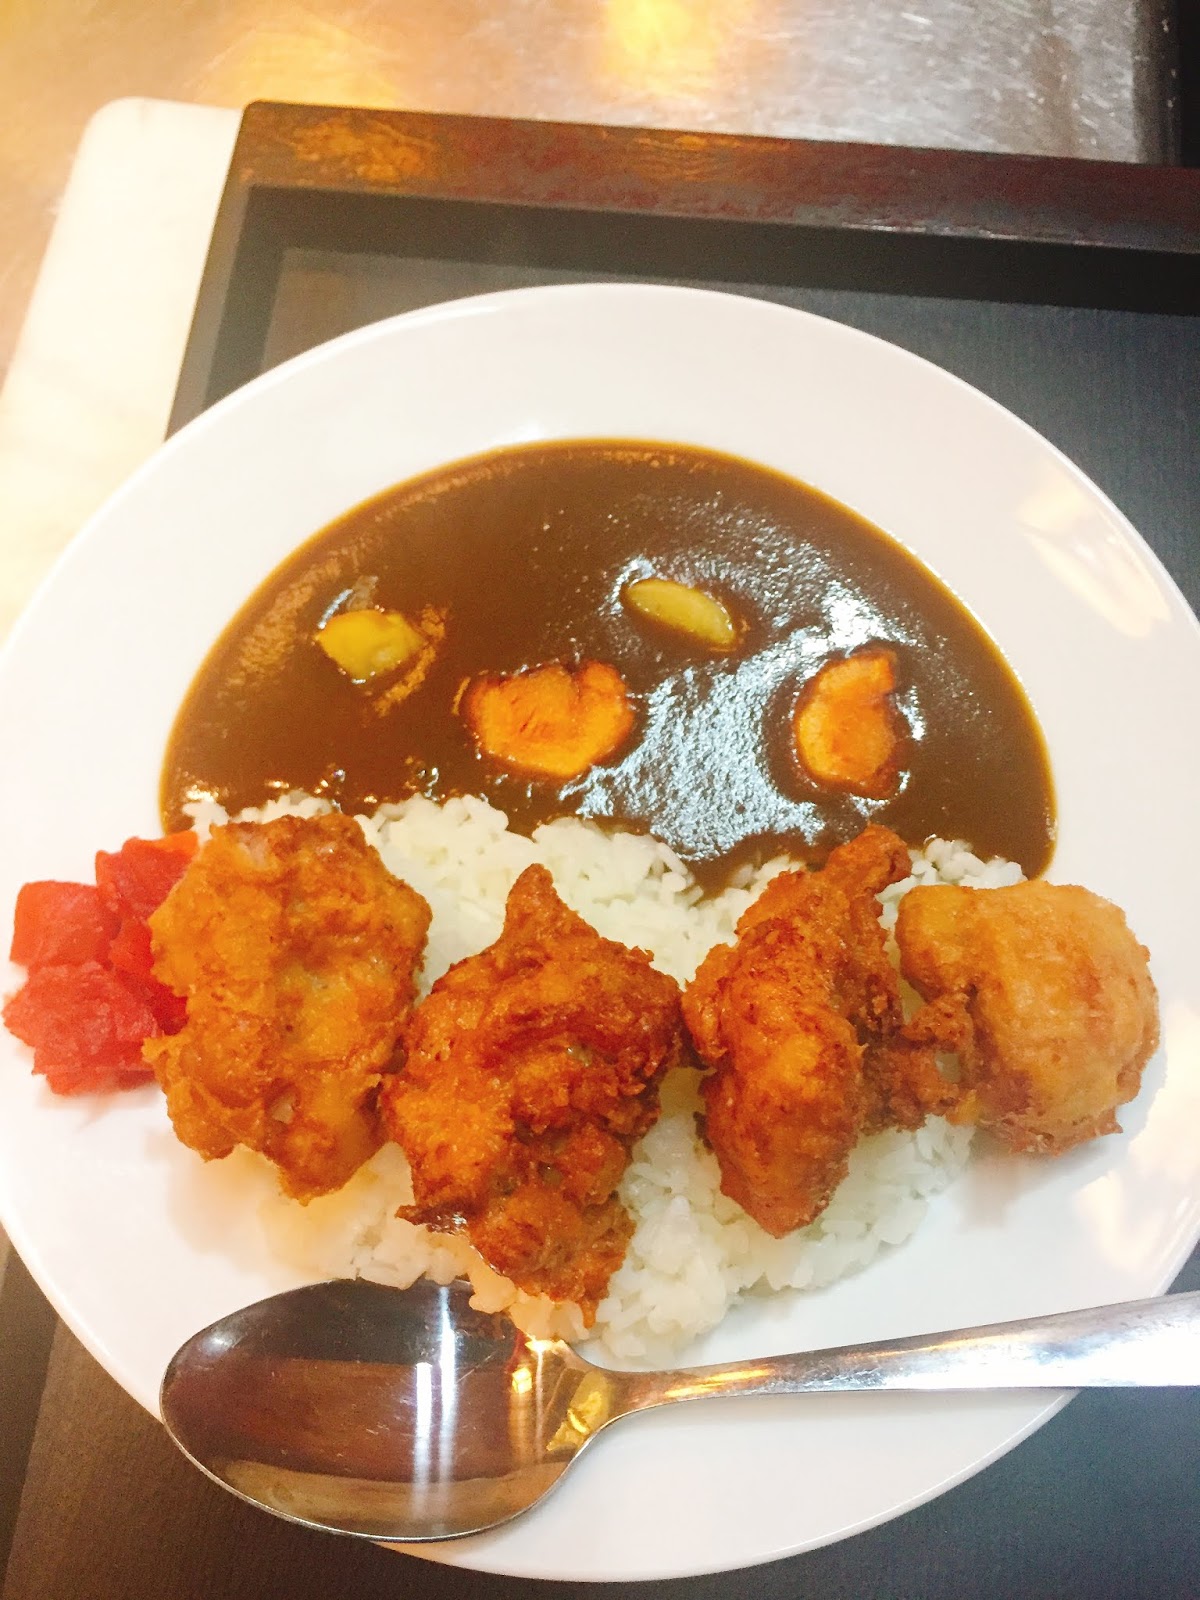 Curry%2Bwith%2Bchicken%2B%25281%2529.JPG